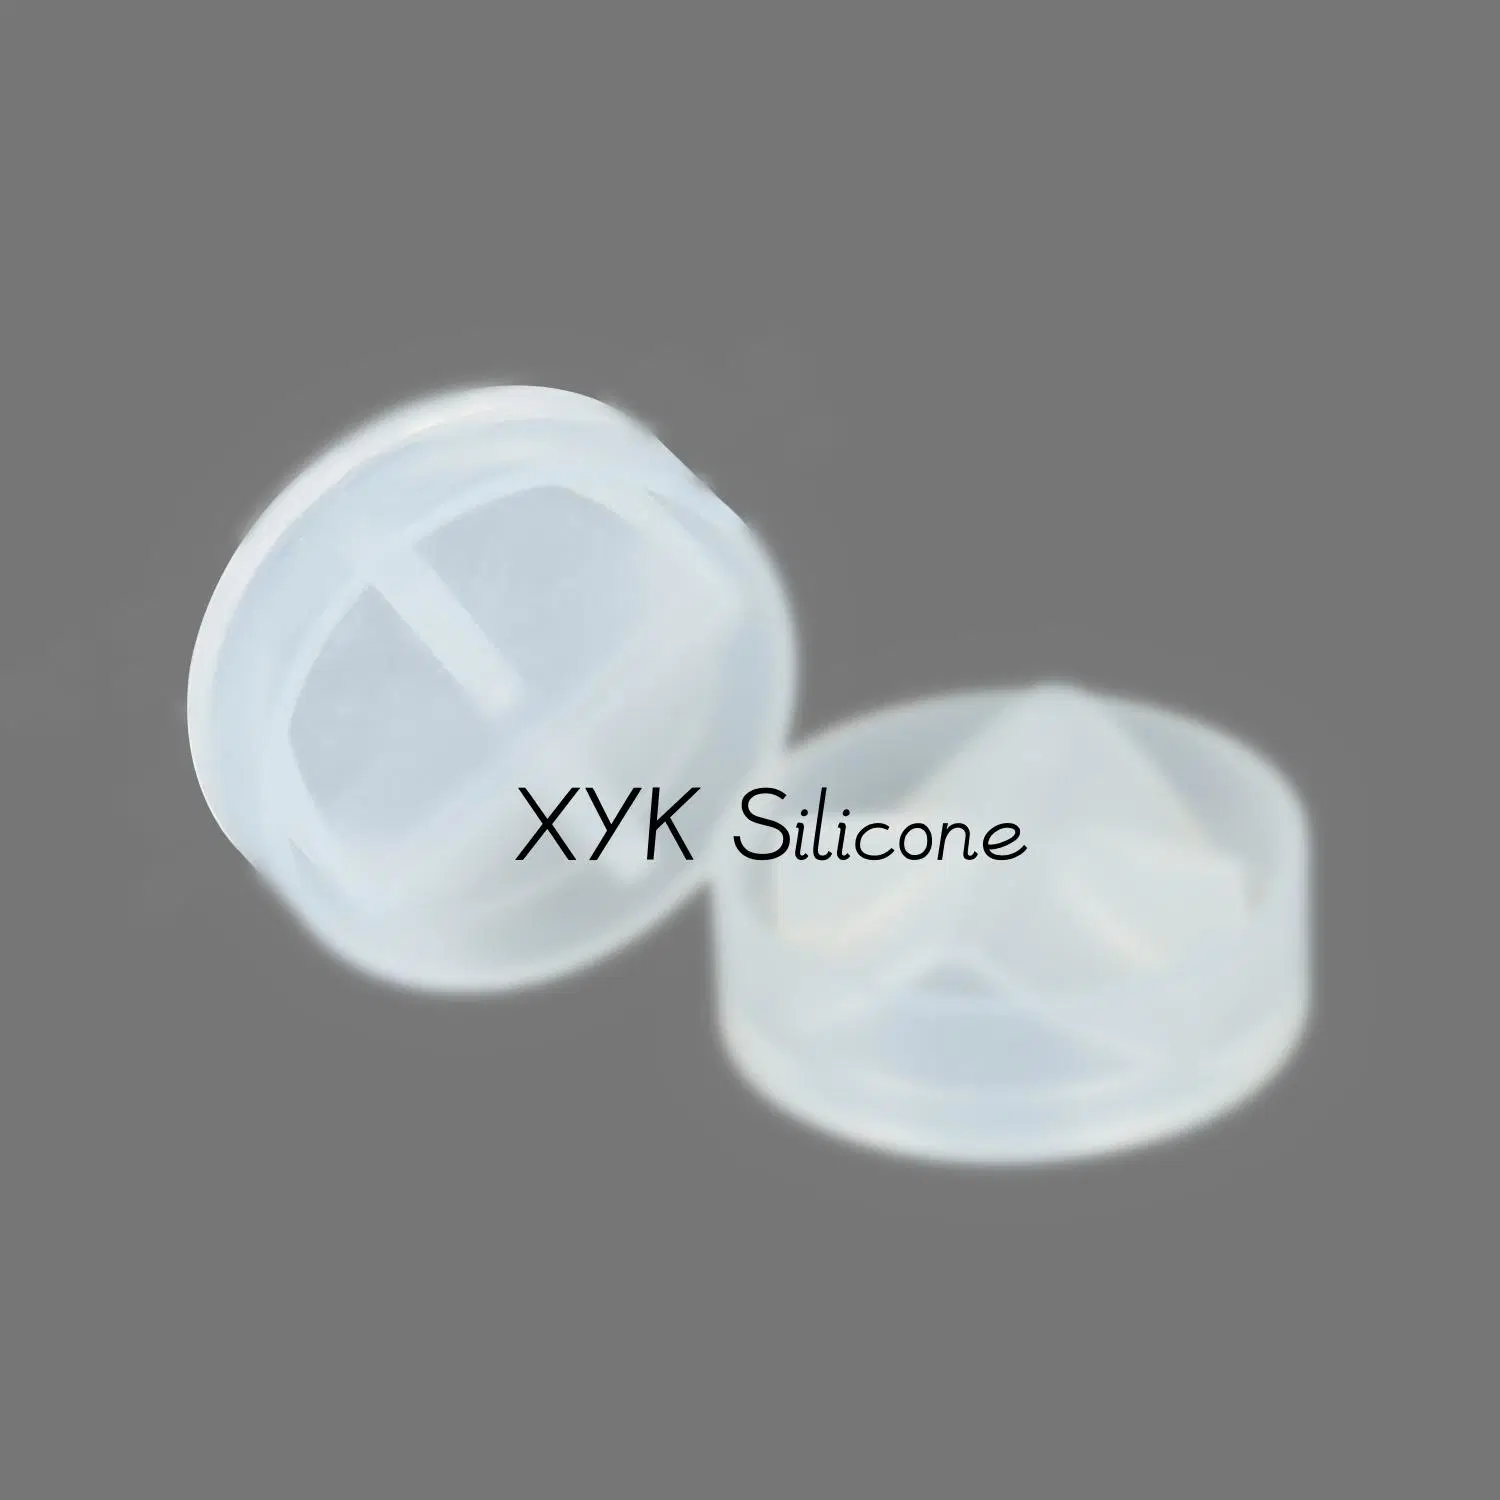 Silicone Products One-Way Valve for Medical Use